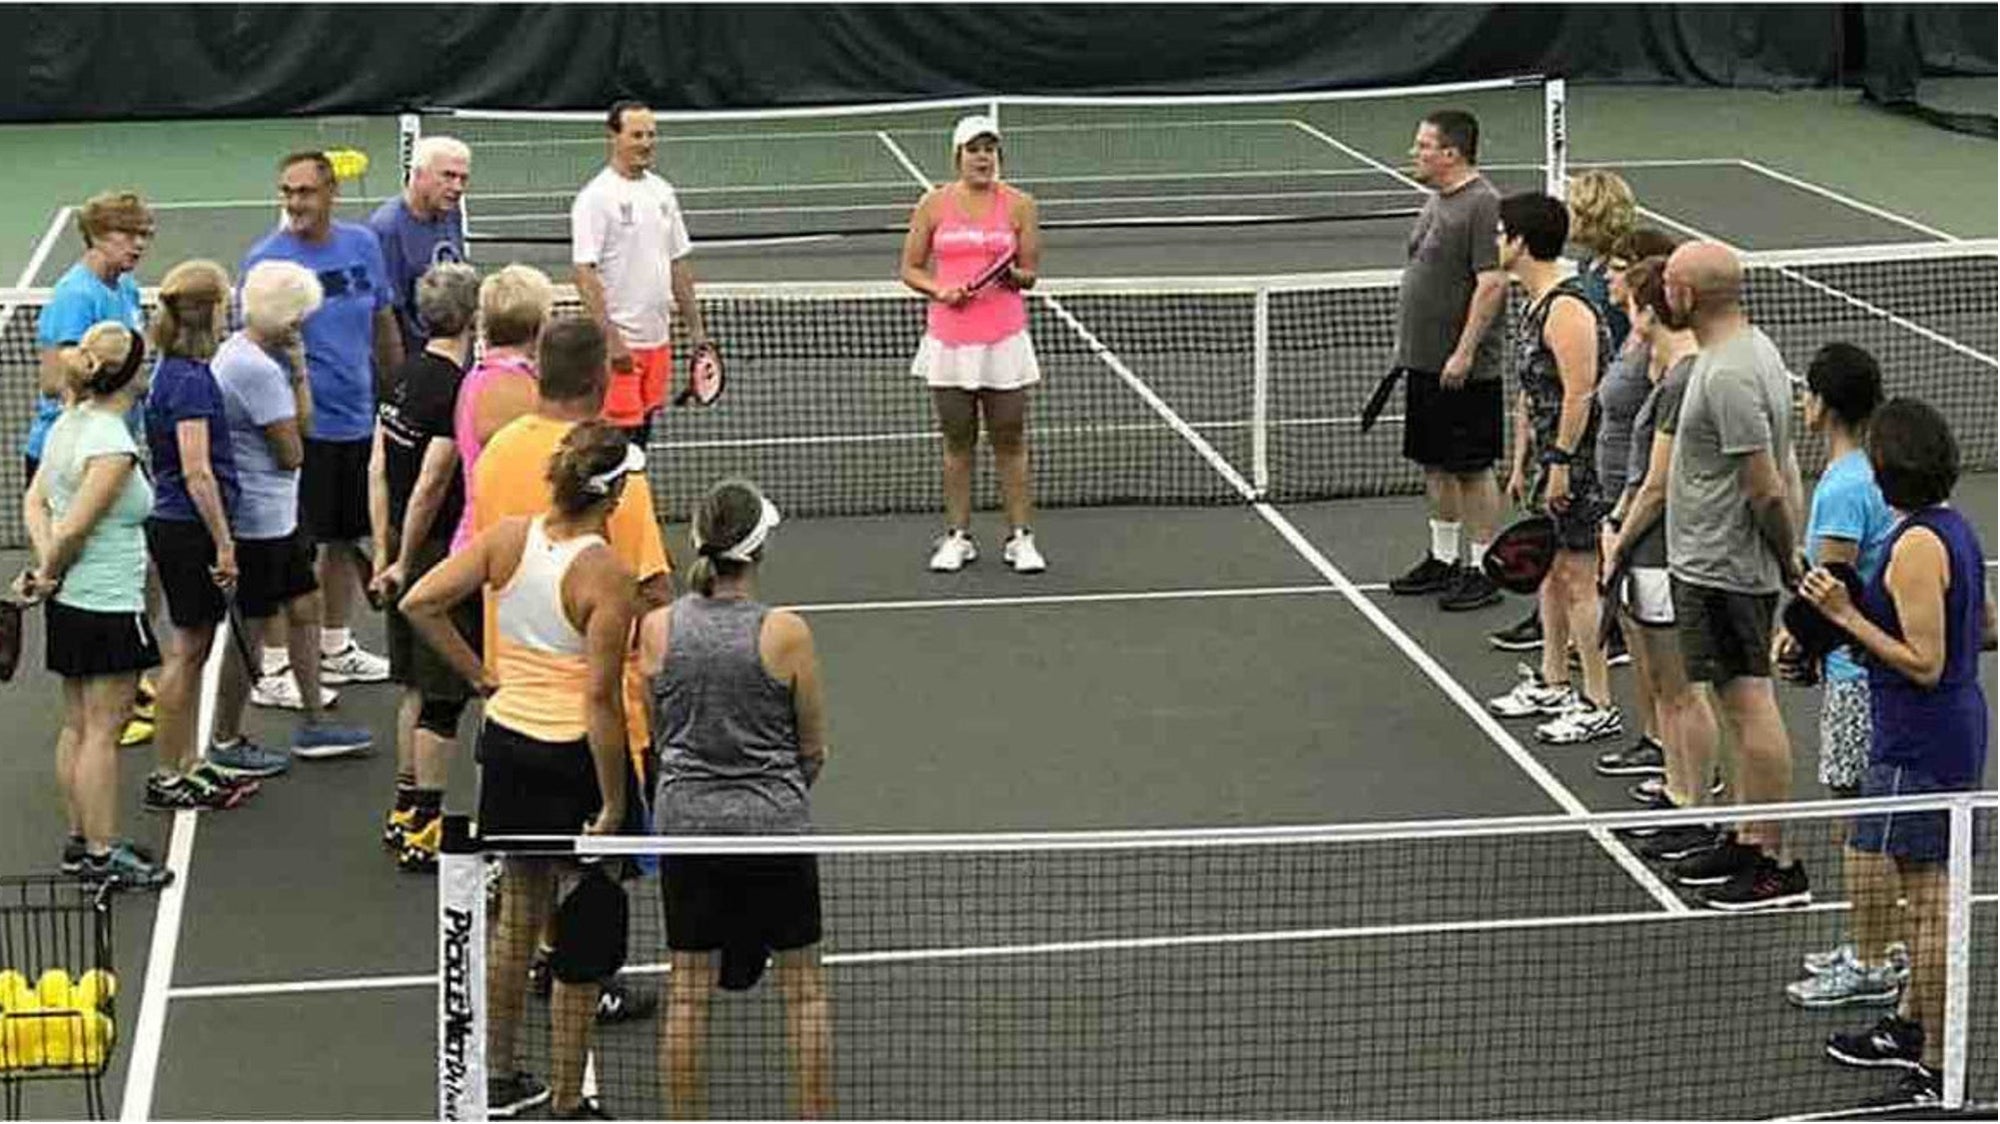 pickleball terms you'll hear around and on the pickleball courts